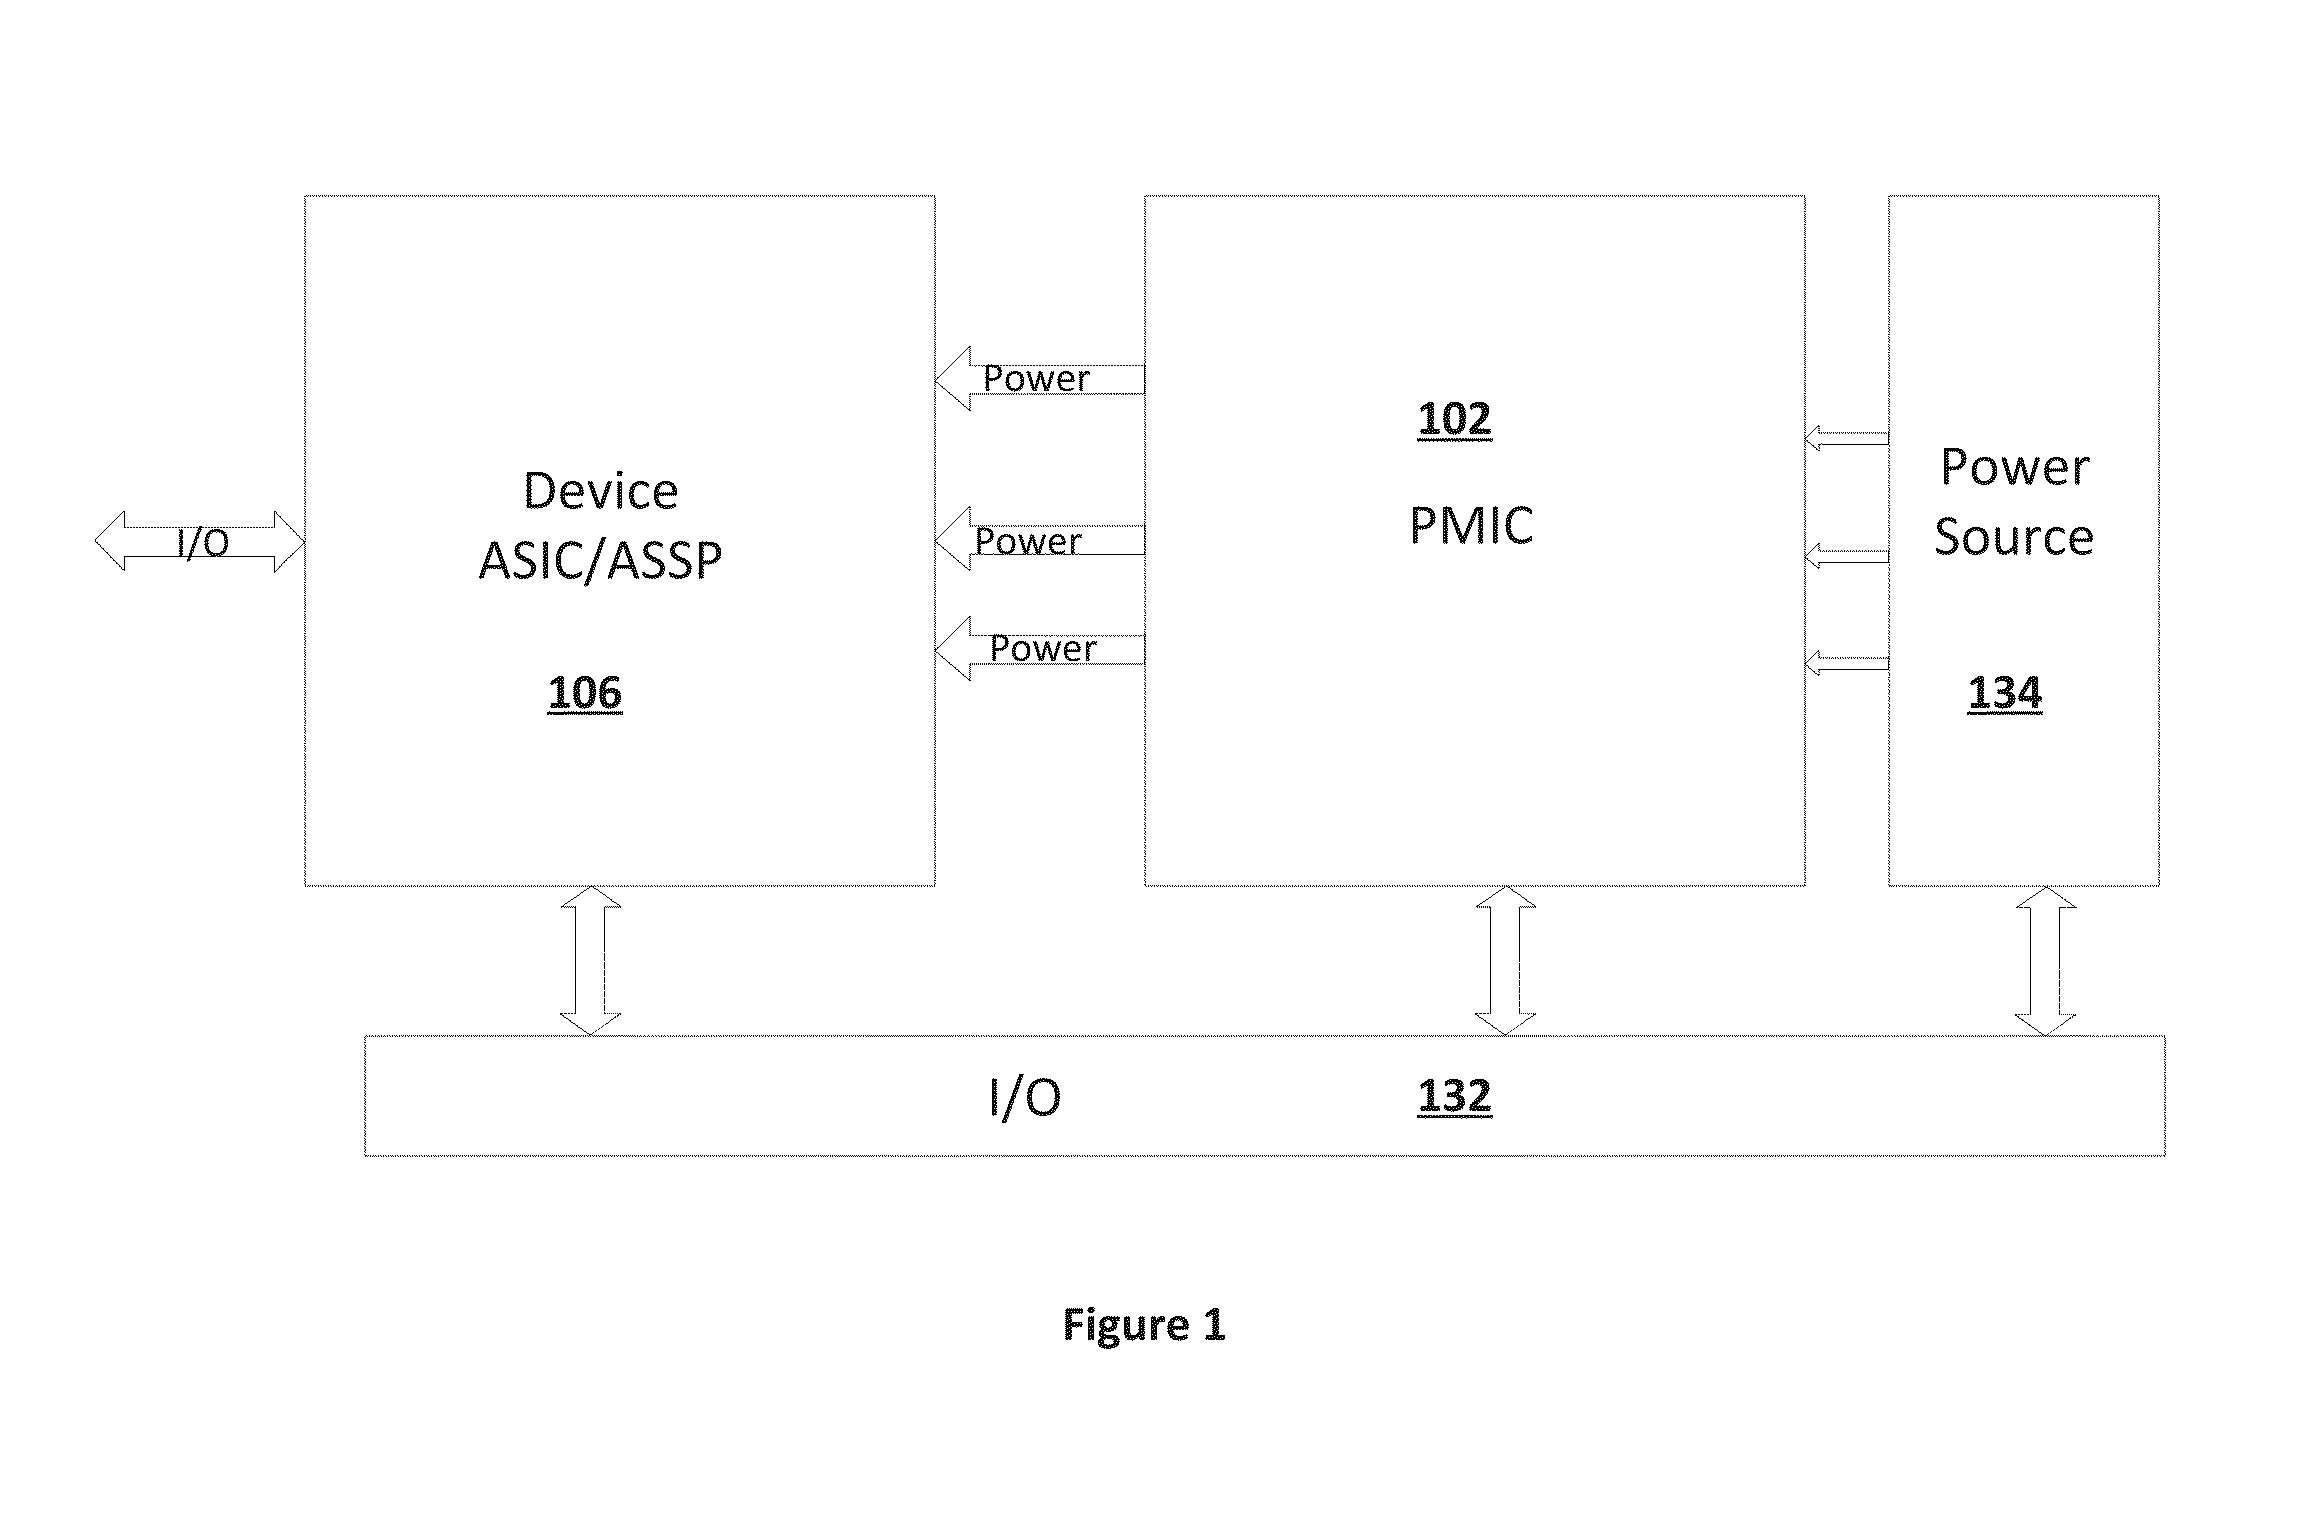 Configurable power management integrated circuit